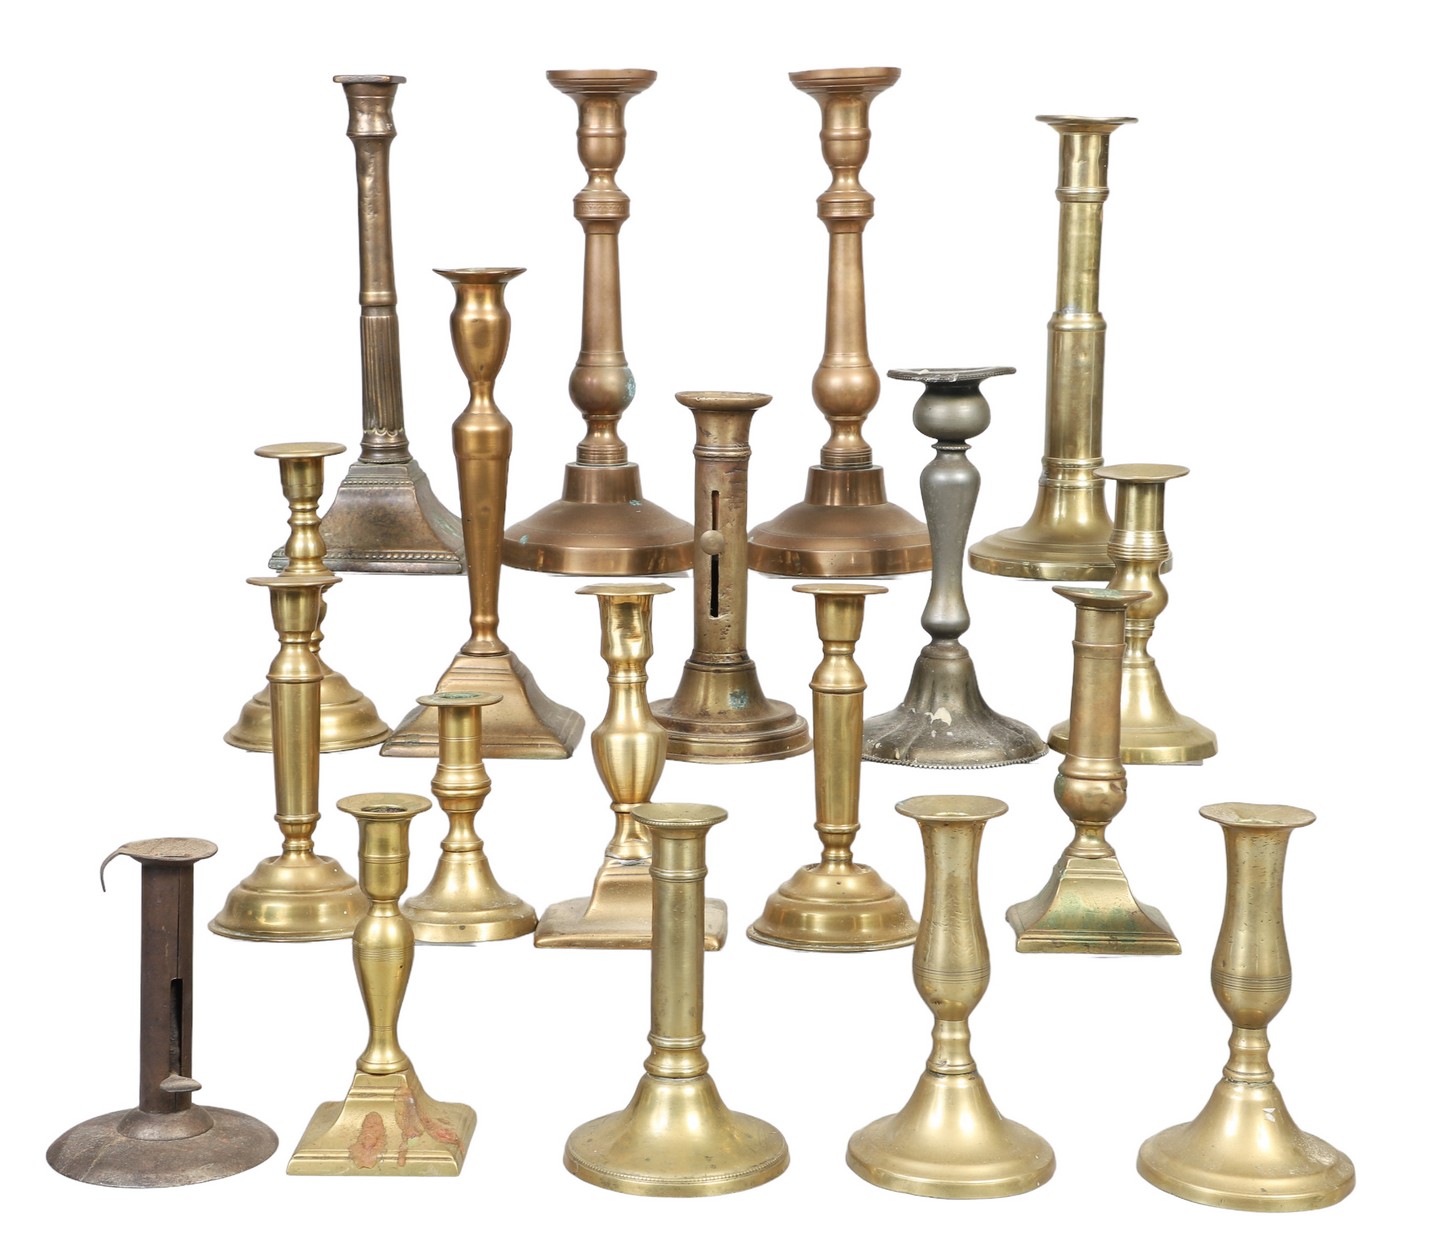  19 19th C Candlesticks to include 2e093d